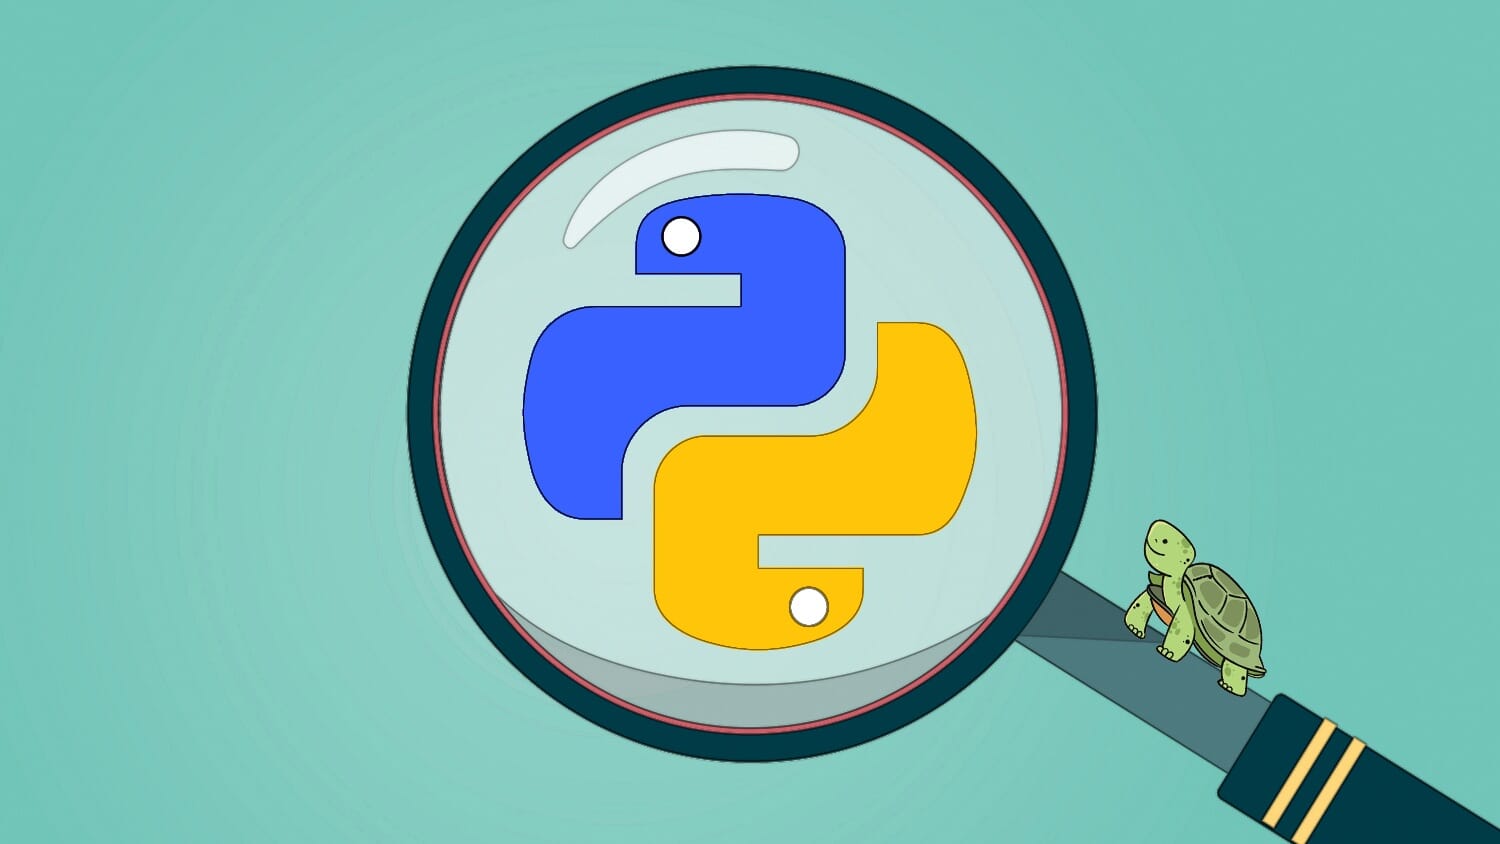 Python & Turtle: A Practical Guide for Beginners and Beyond